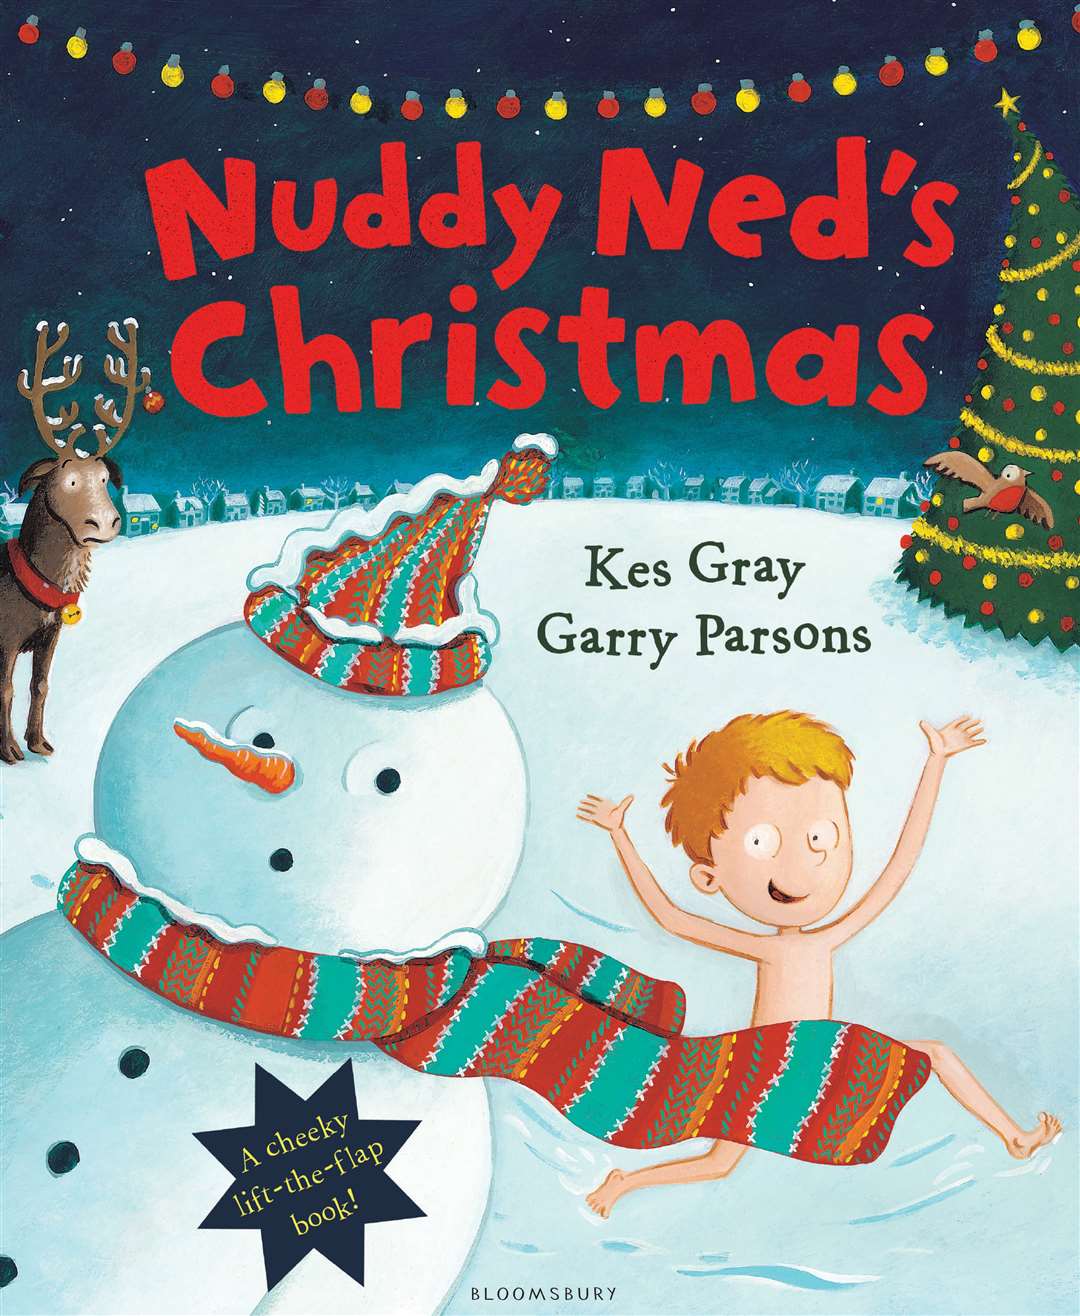 Nuddy Ned's Christmas by Kes Gray